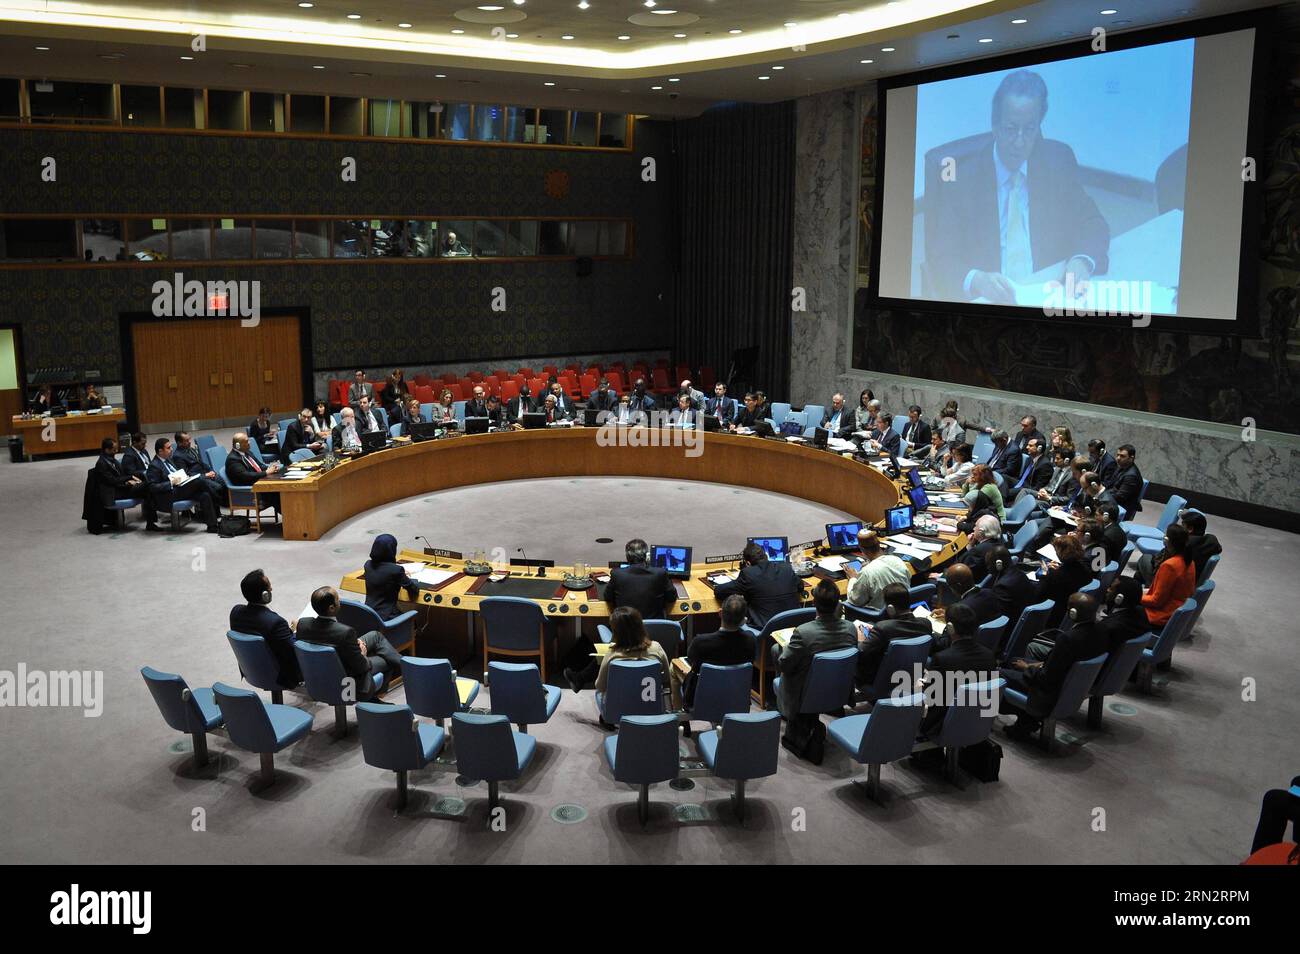 (150322) -- NEW YORK, March 22, 2015 -- The UN Security Council hears a briefing by UN Special Adviser JamaL Benomar via video link from Doha, during the council s emergency meeting on the situation of Yemen, at the UN headquarters in New York, on March 22, 2015. The UN Security Council on Sunday adopted a presidential statement on Yemen, voicing support for Yemeni President Abdo Rabbo Mansour Hadi and calling upon all parties to refrain from taking actions that undermine the legitimacy of the president. ) UN-NEW YORK-SECURITY COUNCIL-YEMEN-EMERGENCY MEETING NiuxXiaolei PUBLICATIONxNOTxINxCHN Stock Photo